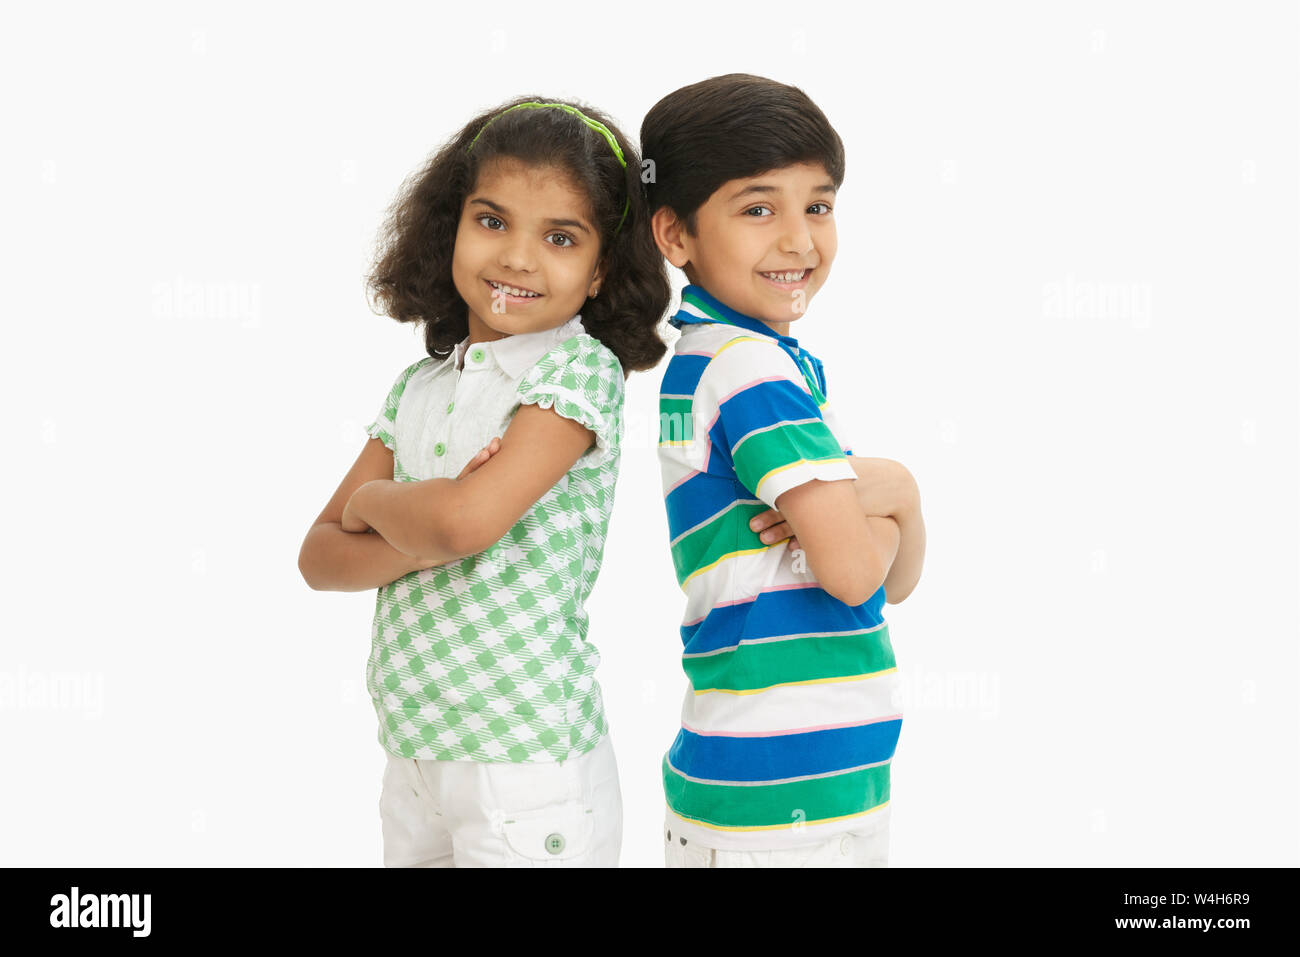 Two children standing back to back and smiling Stock Photo - Alamy